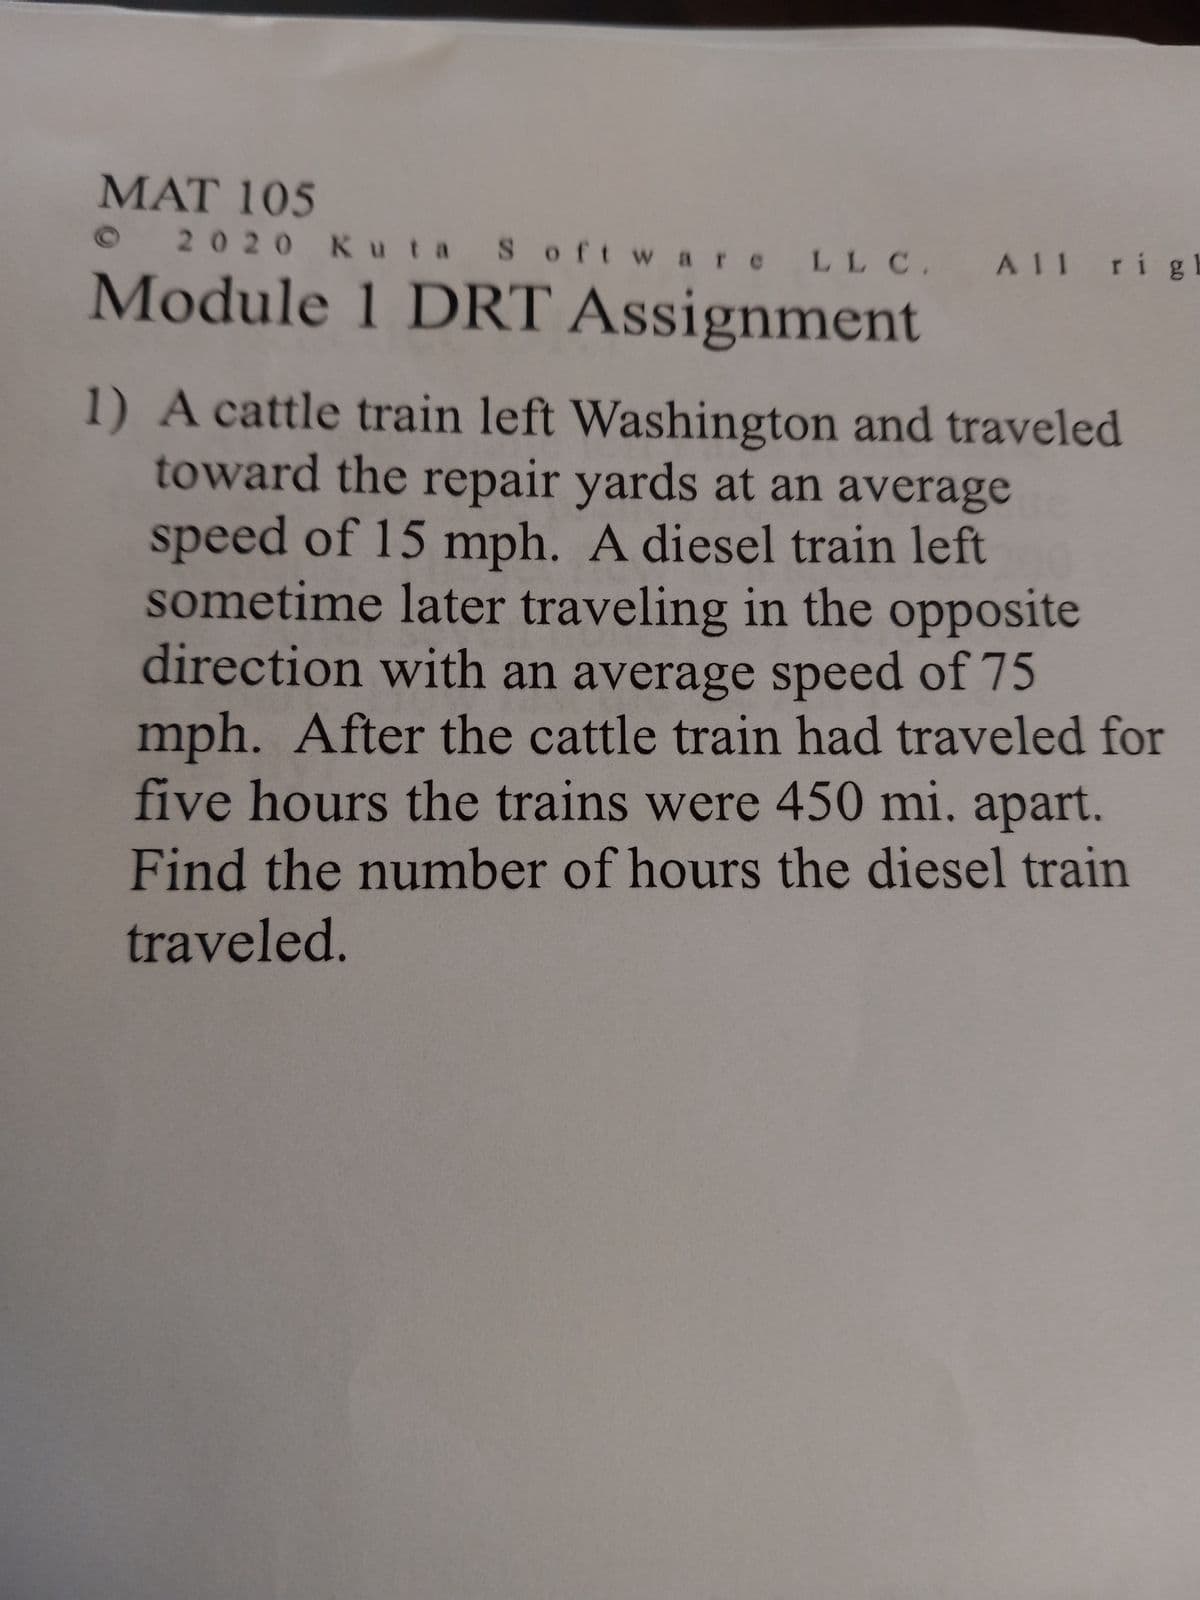 MAT 105
2020 Kuta Software LLC. All righ
Module 1 DRT Assignment
1) A cattle train left Washington and traveled
toward the repair yards at an average
speed of 15 mph. A diesel train left
sometime later traveling in the opposite
direction with an average speed of 75
mph. After the cattle train had traveled for
five hours the trains were 450 mi. apart.
Find the number of hours the diesel train
traveled.